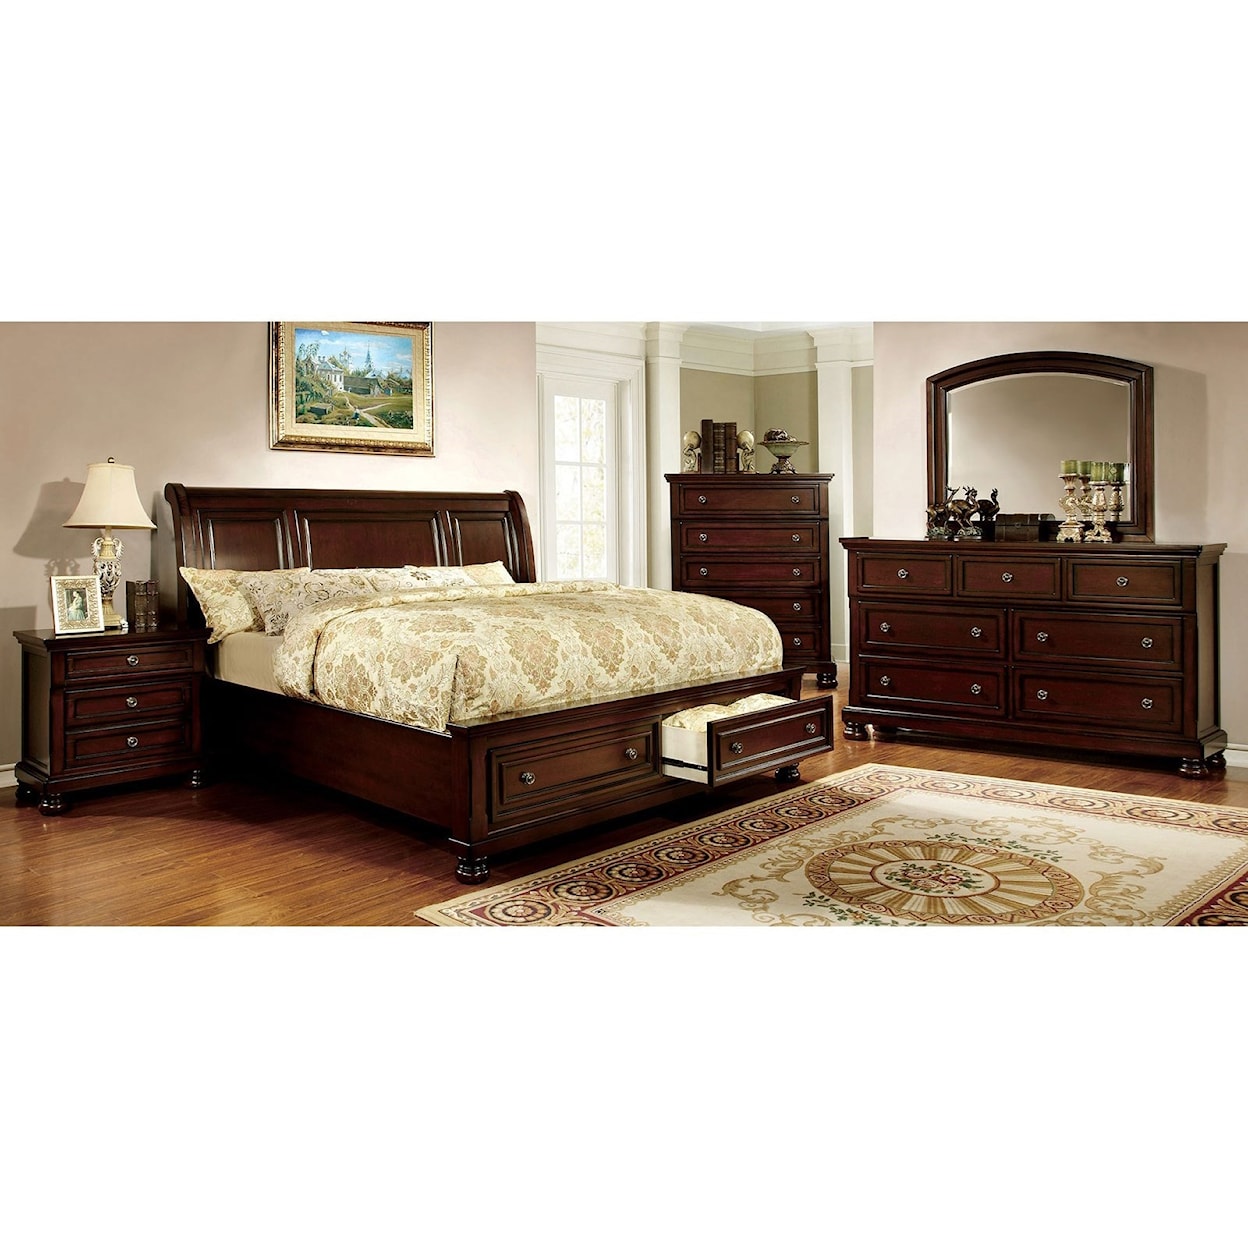 Furniture of America Northville Queen Bed